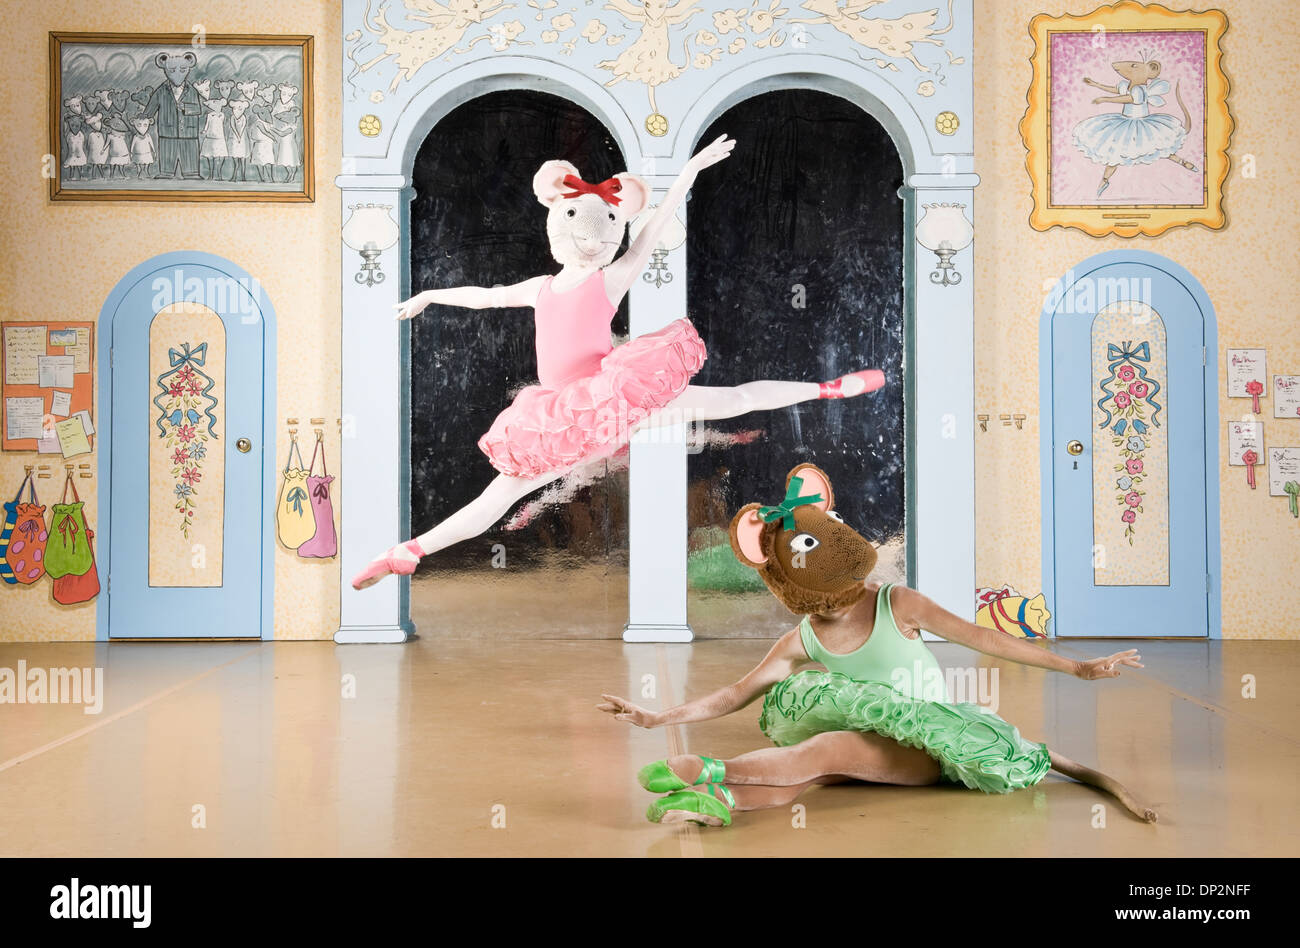 Angelina Ballerina dancing on stage with her friend. Stock Photo